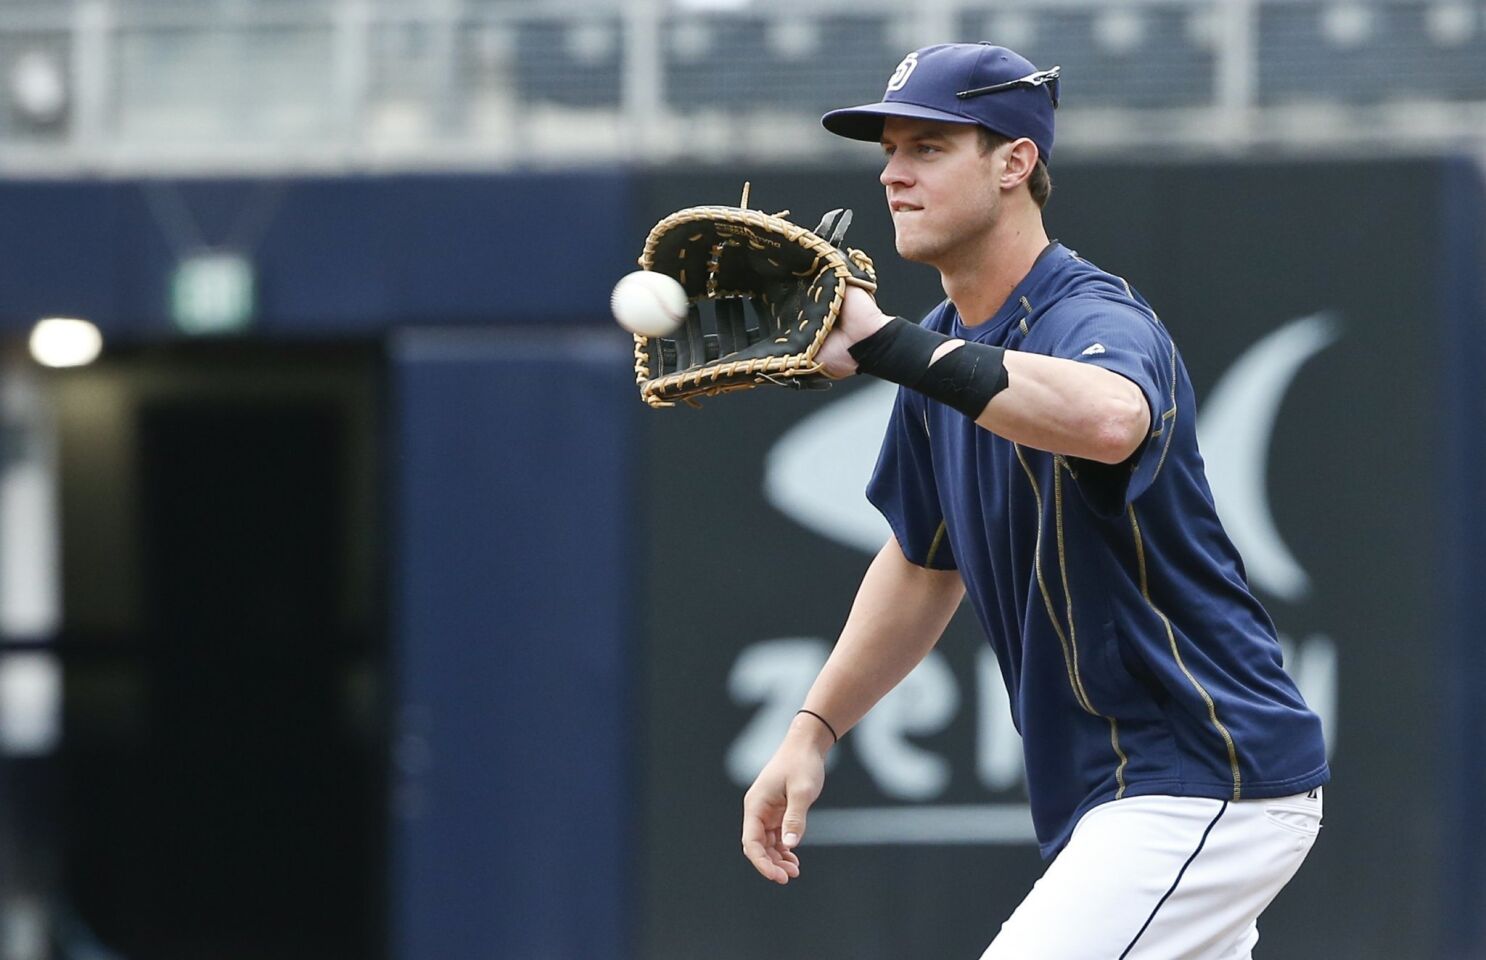 Finding Wil Myers a home on defense - Gaslamp Ball